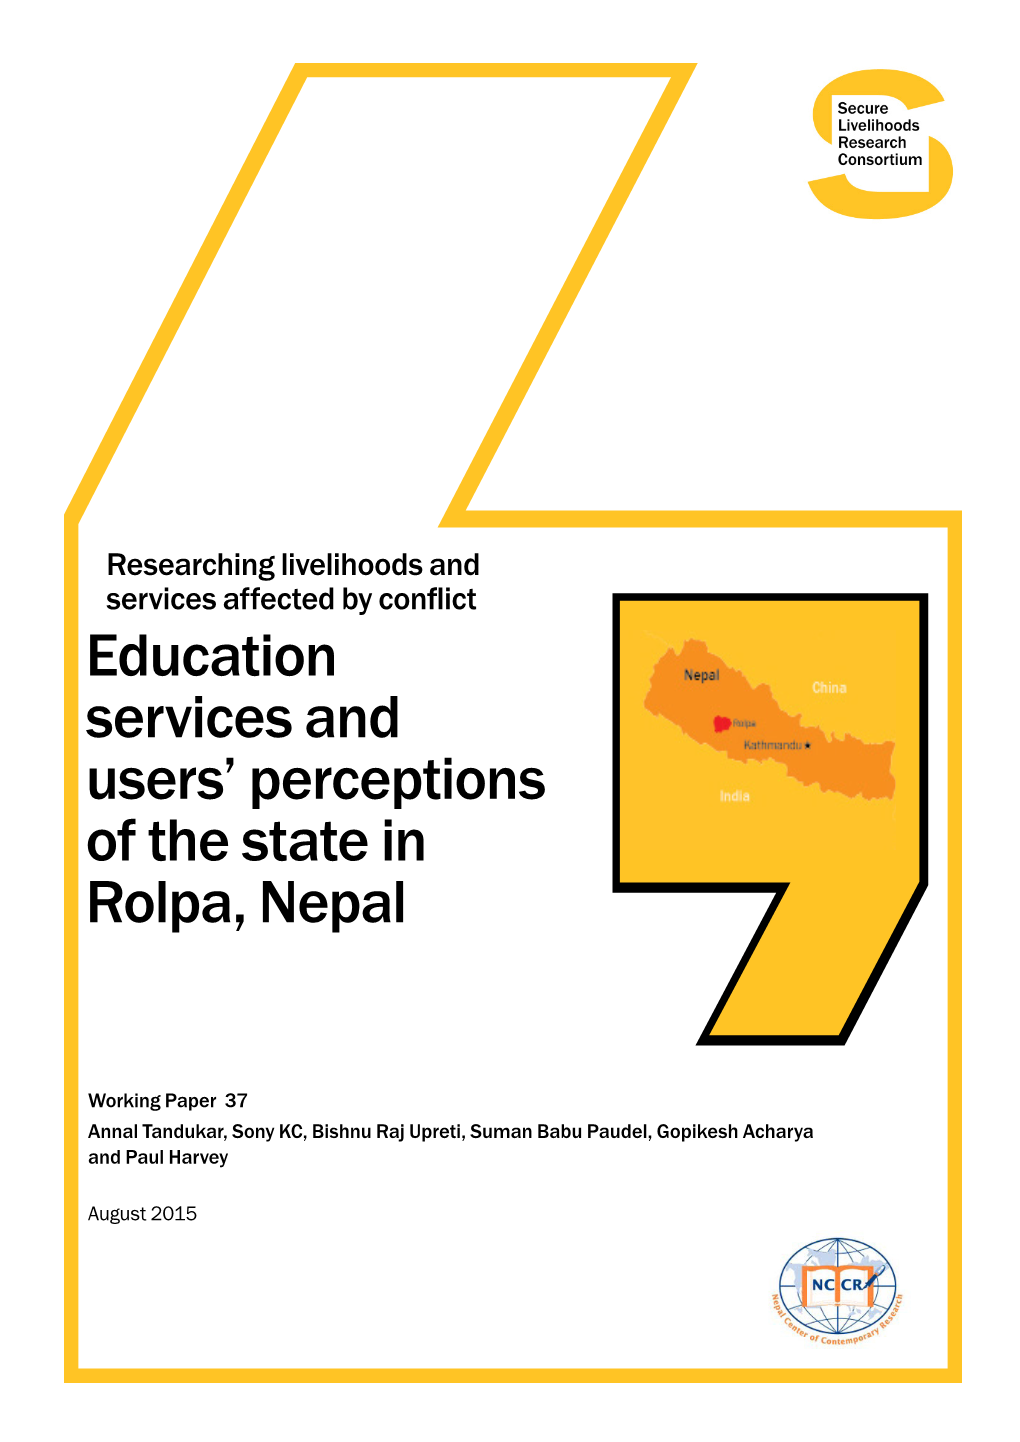 Education Services and Users' Perceptions of the State in Rolpa